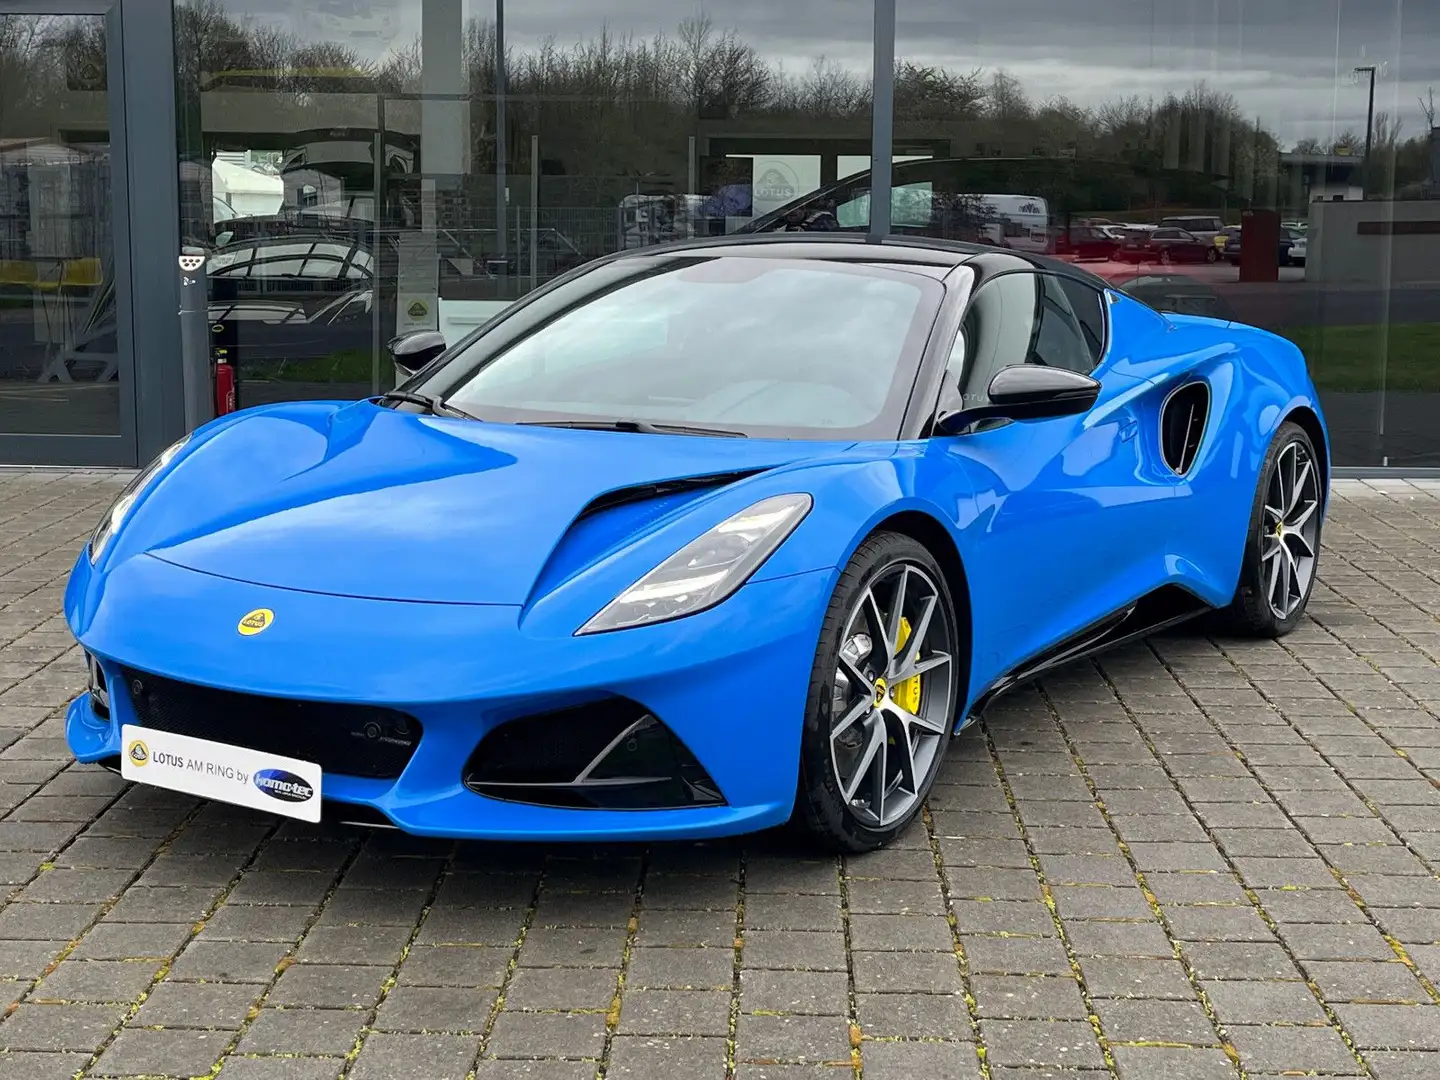 Lotus Emira I4 DCT "First Edition" by Lotus am Ring Albastru - 1